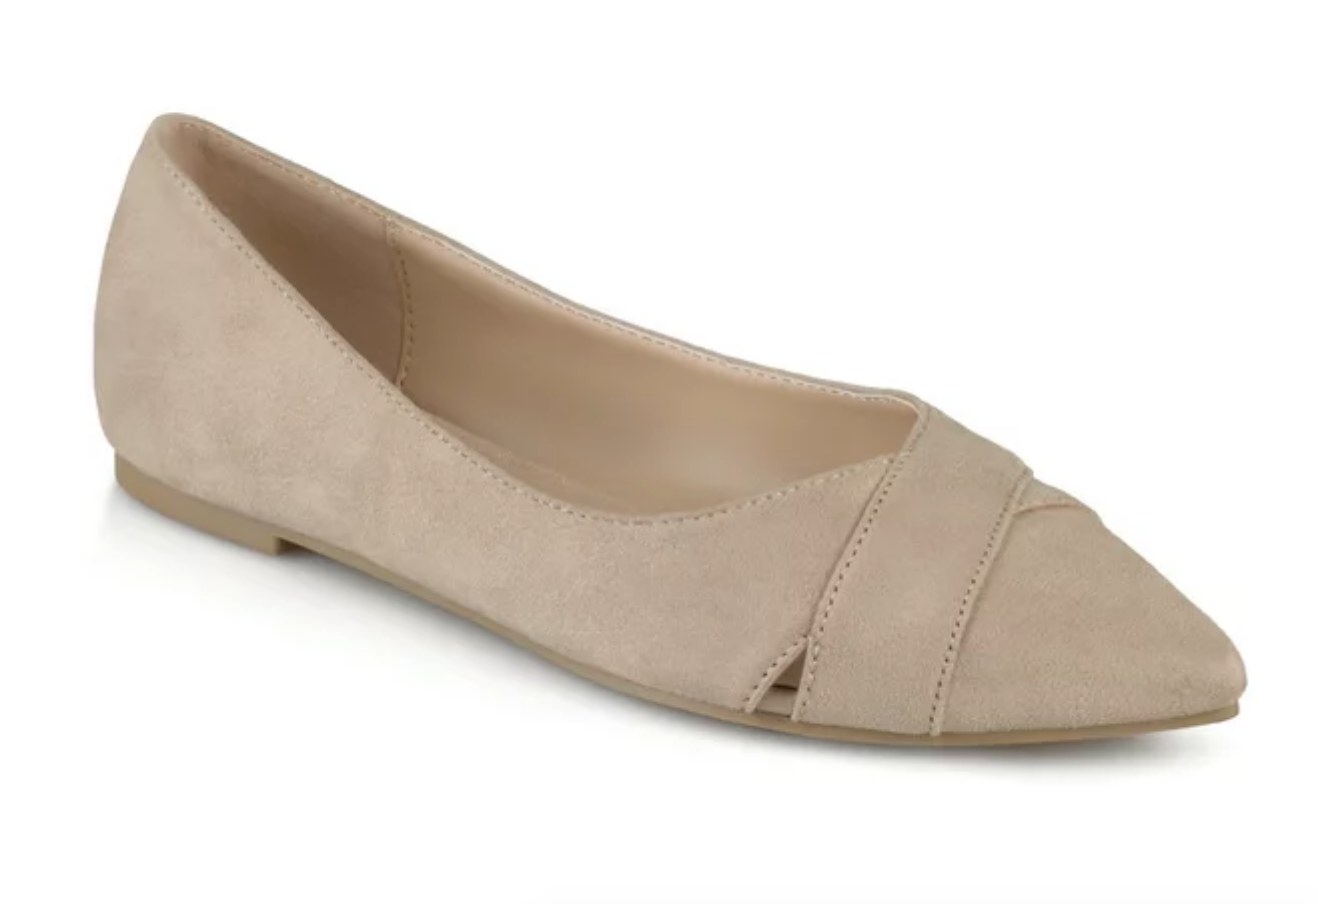 Taupe, suede, pointed-toe flats